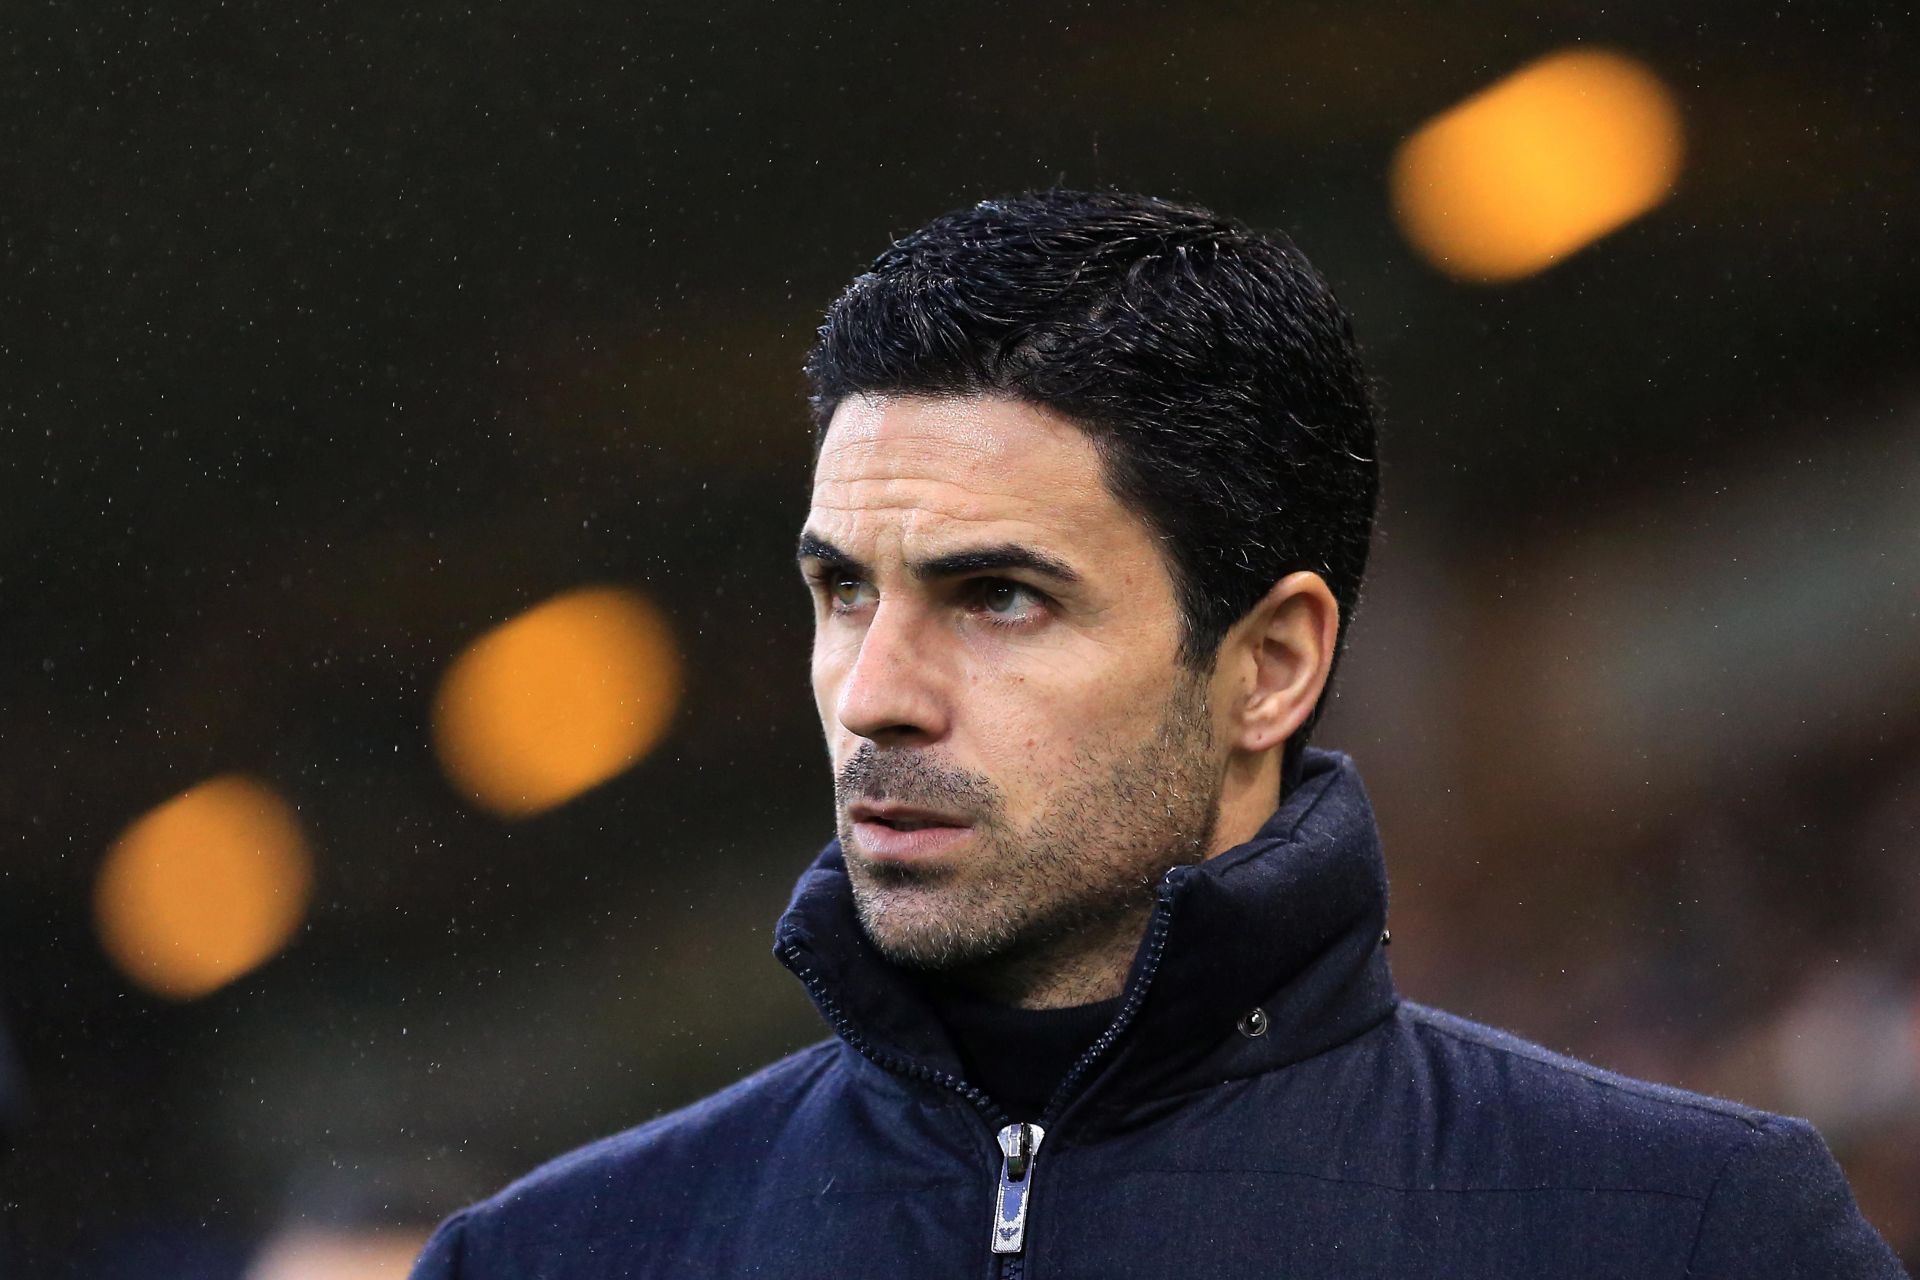 The Gunners have had a decent run of form under Mikel Arteta